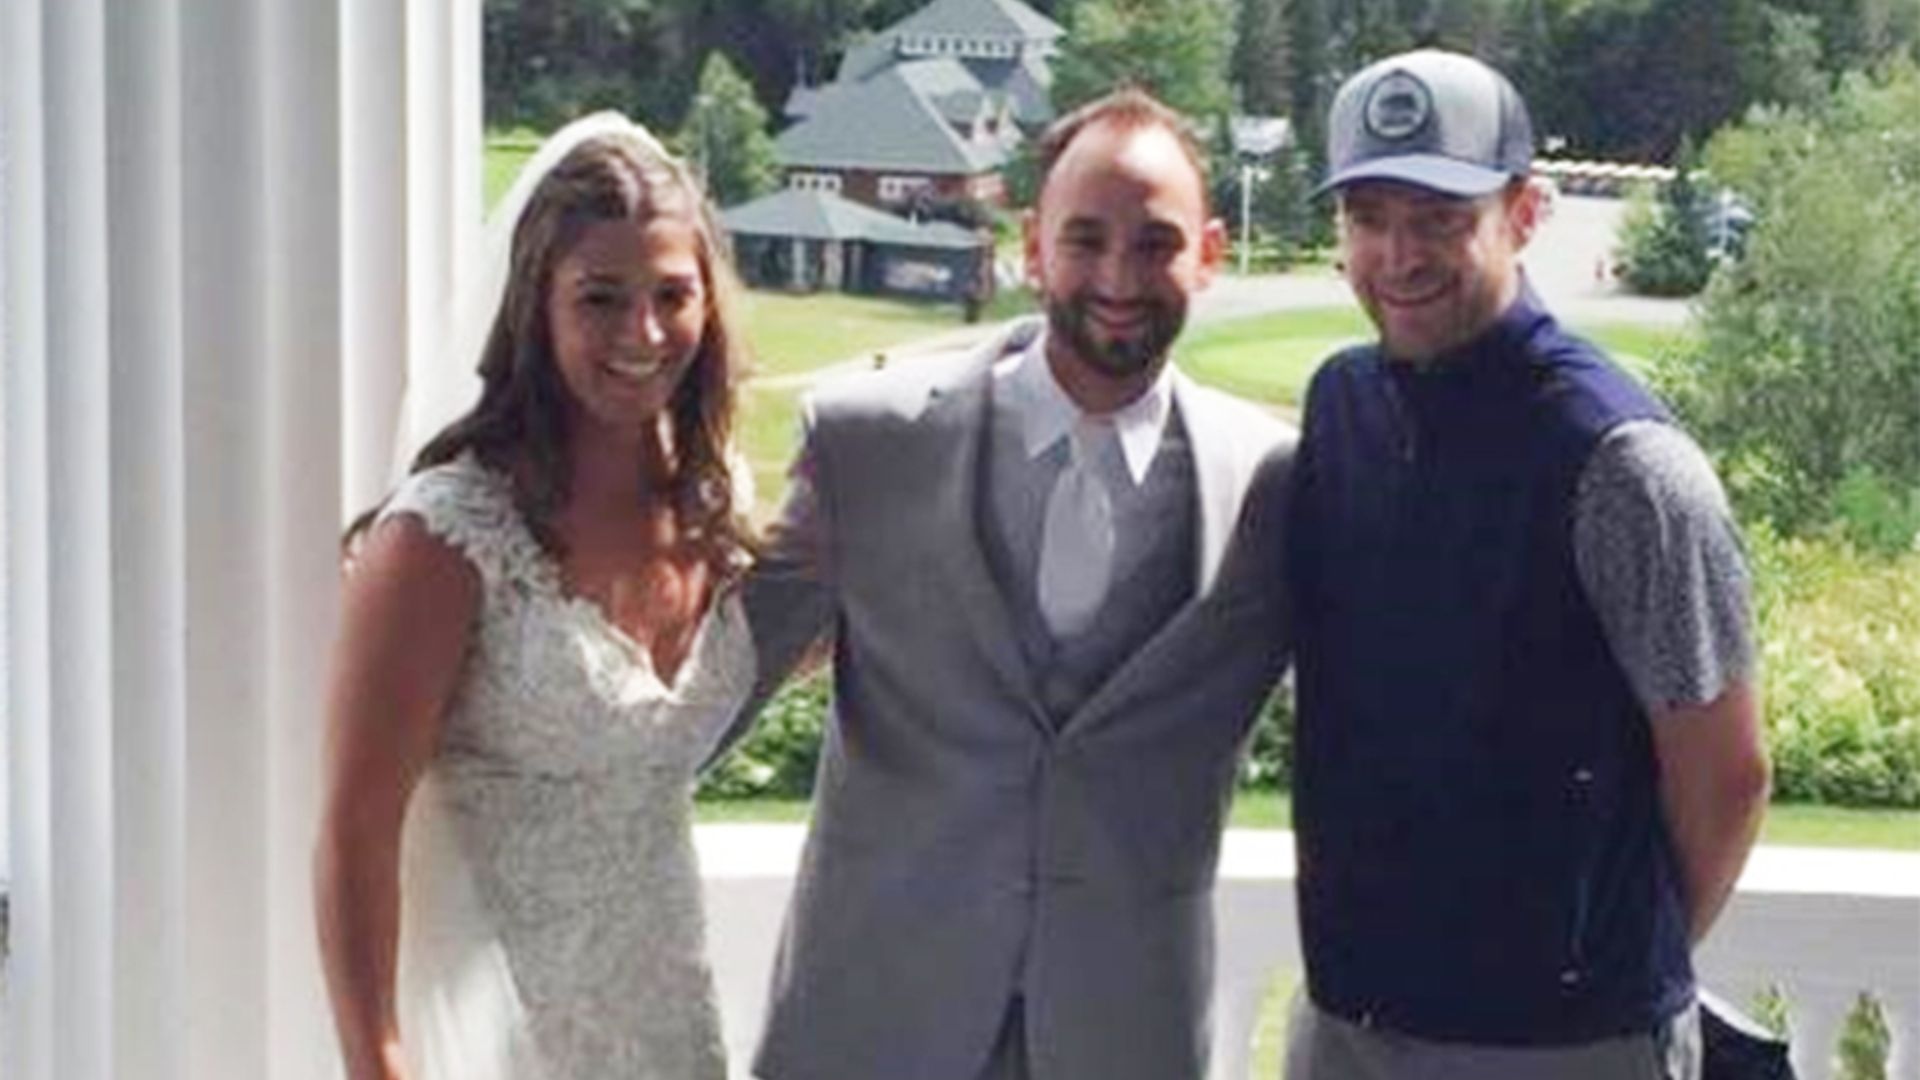 Justin Timberlake crashes wedding to take photo with bride and groom